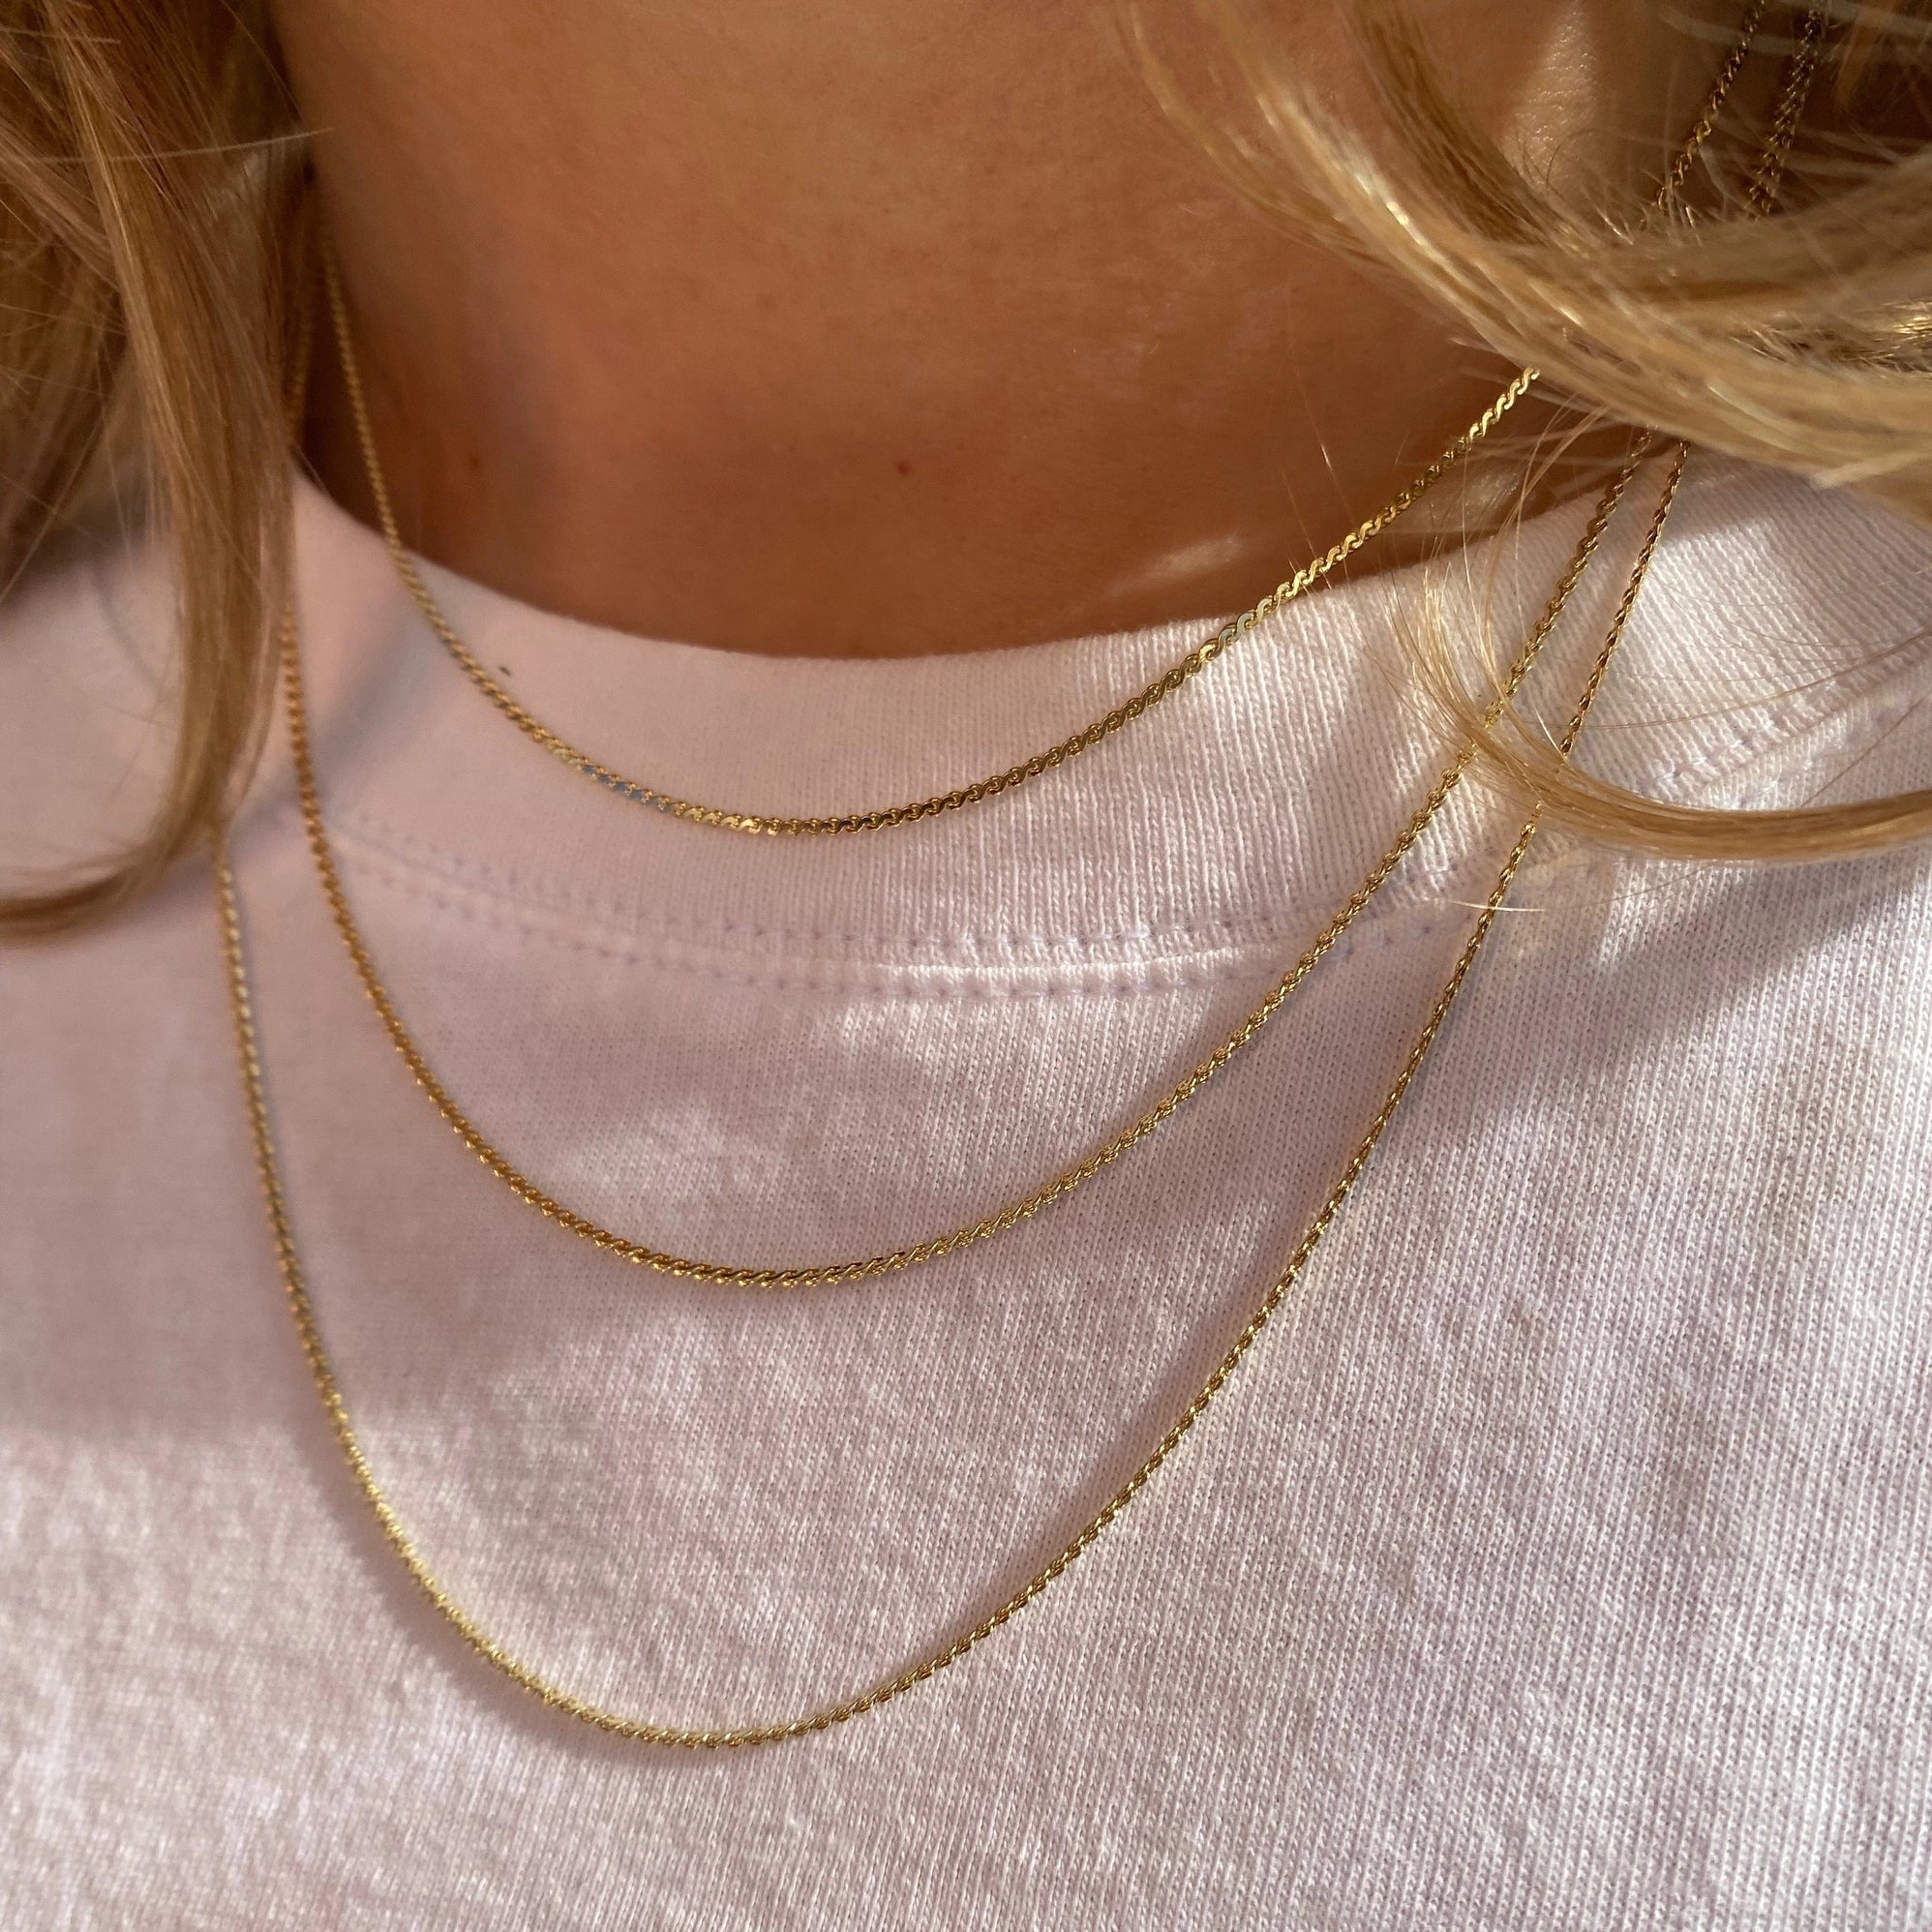 Dainty Chain Necklace, 18k Gold Filled